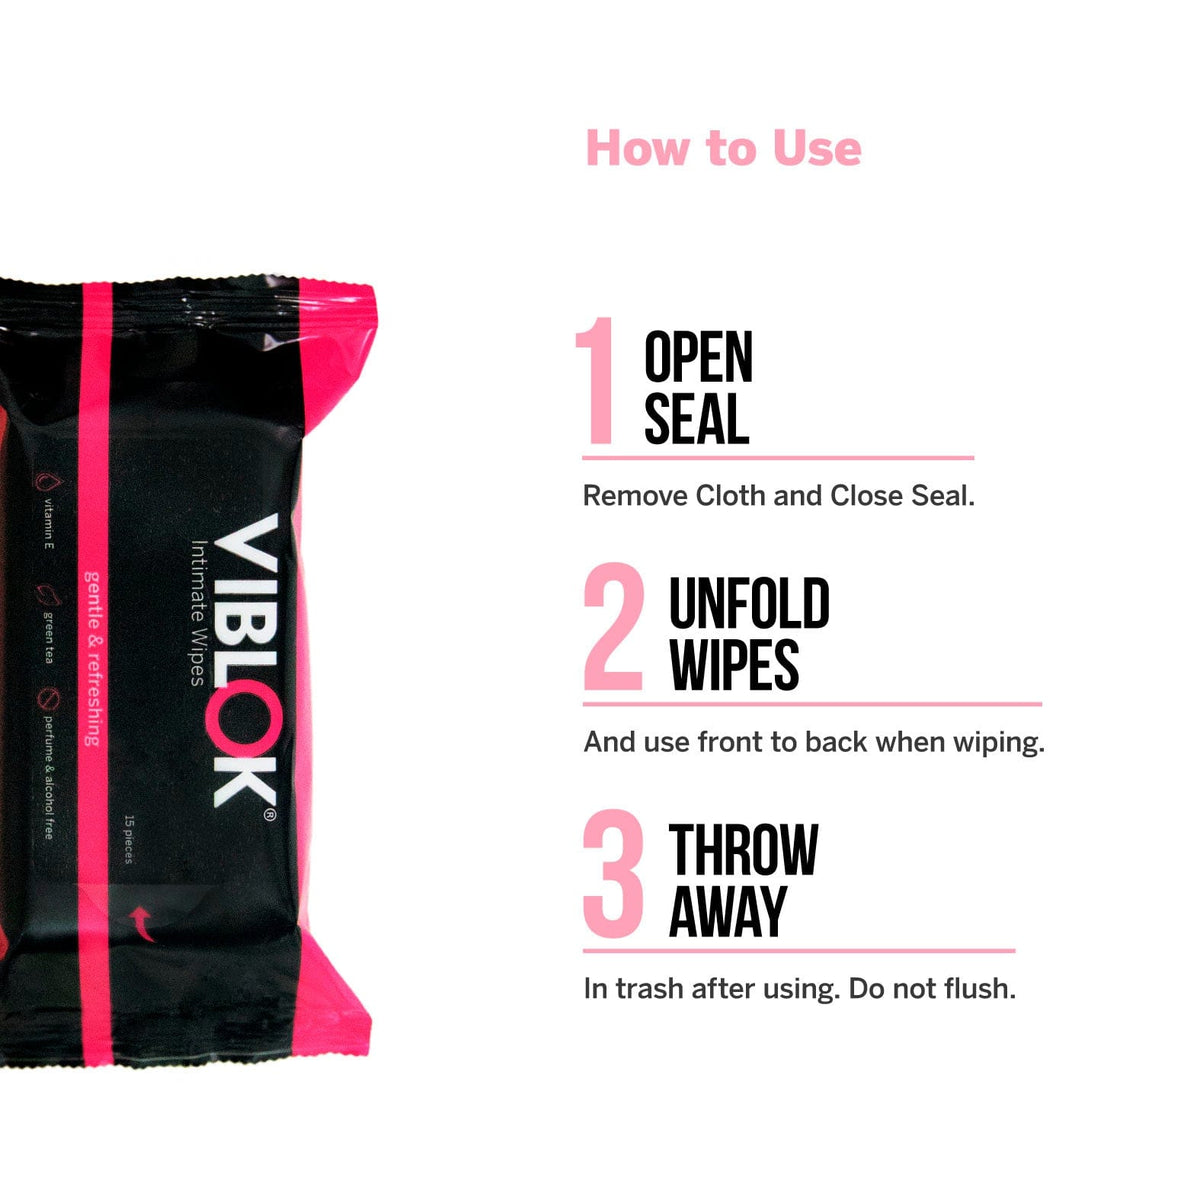 Description of 'How to Use' the wipes. Open seal, unfold wipes, throw away but do not flush.